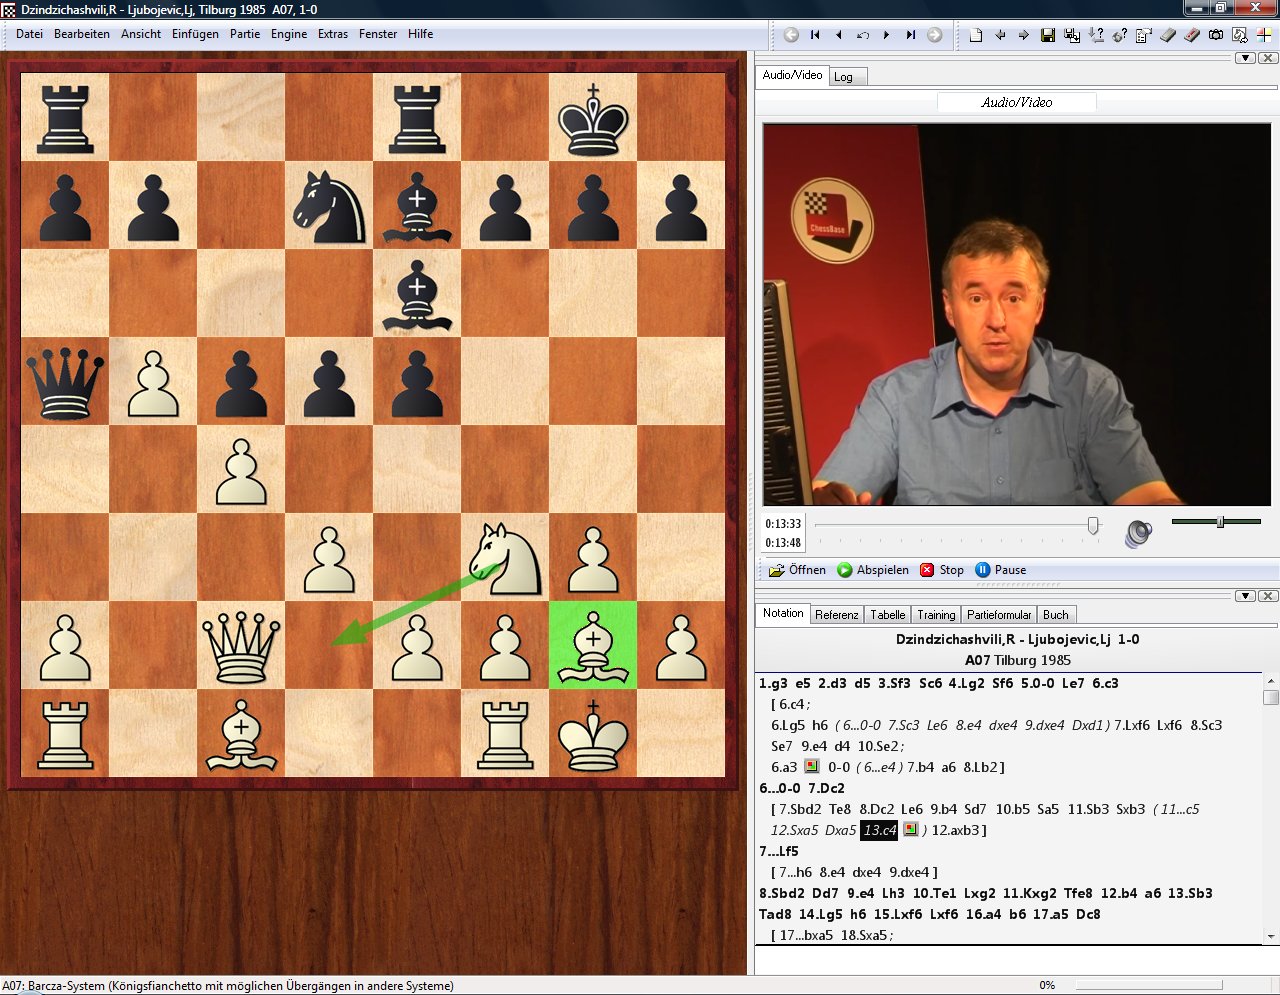 Why does everyone play the Bowdler Attack? - Chess Forums - Page 3 